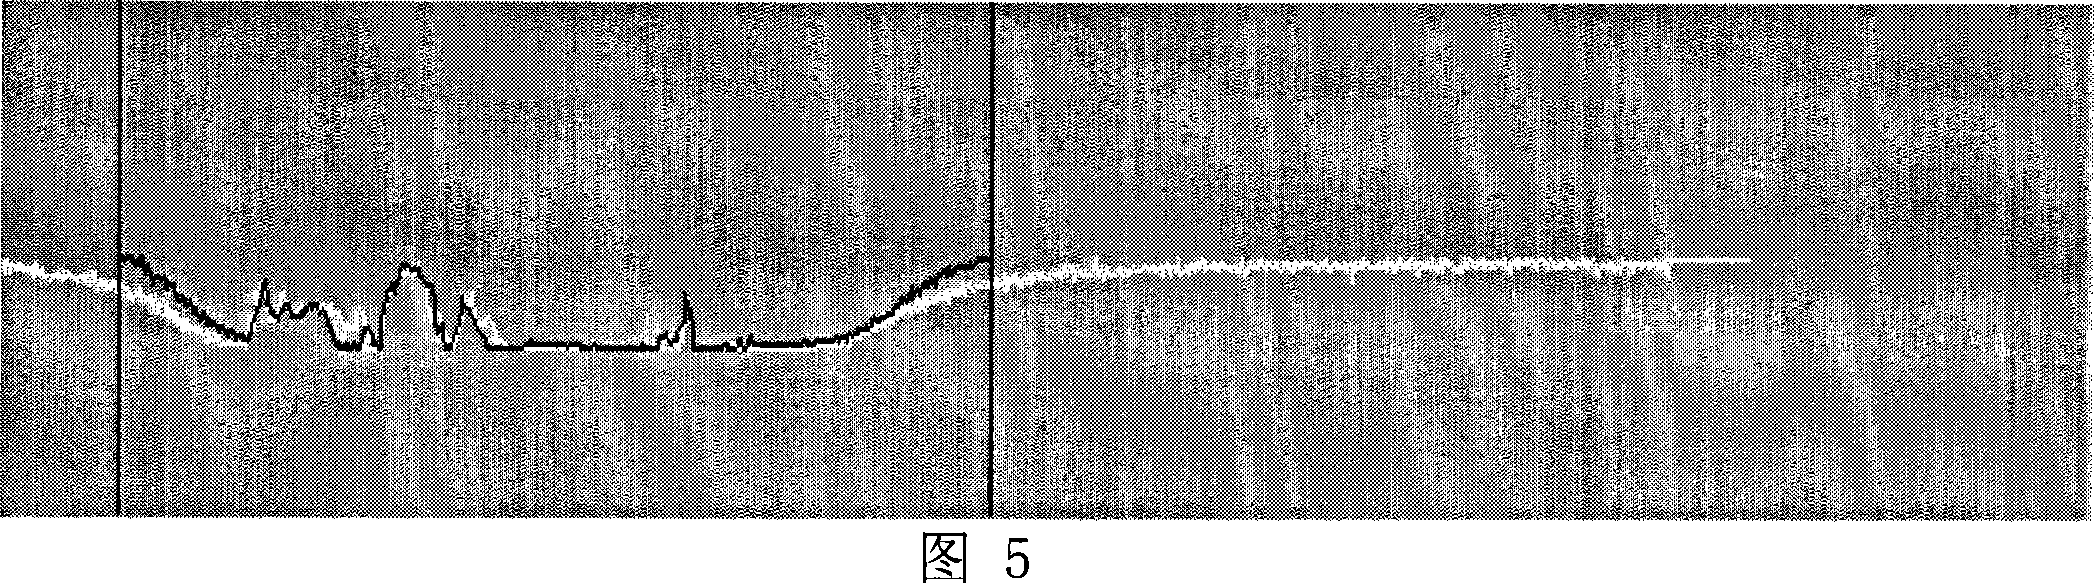 Method for matching vehicle speed based on linear array CCD image